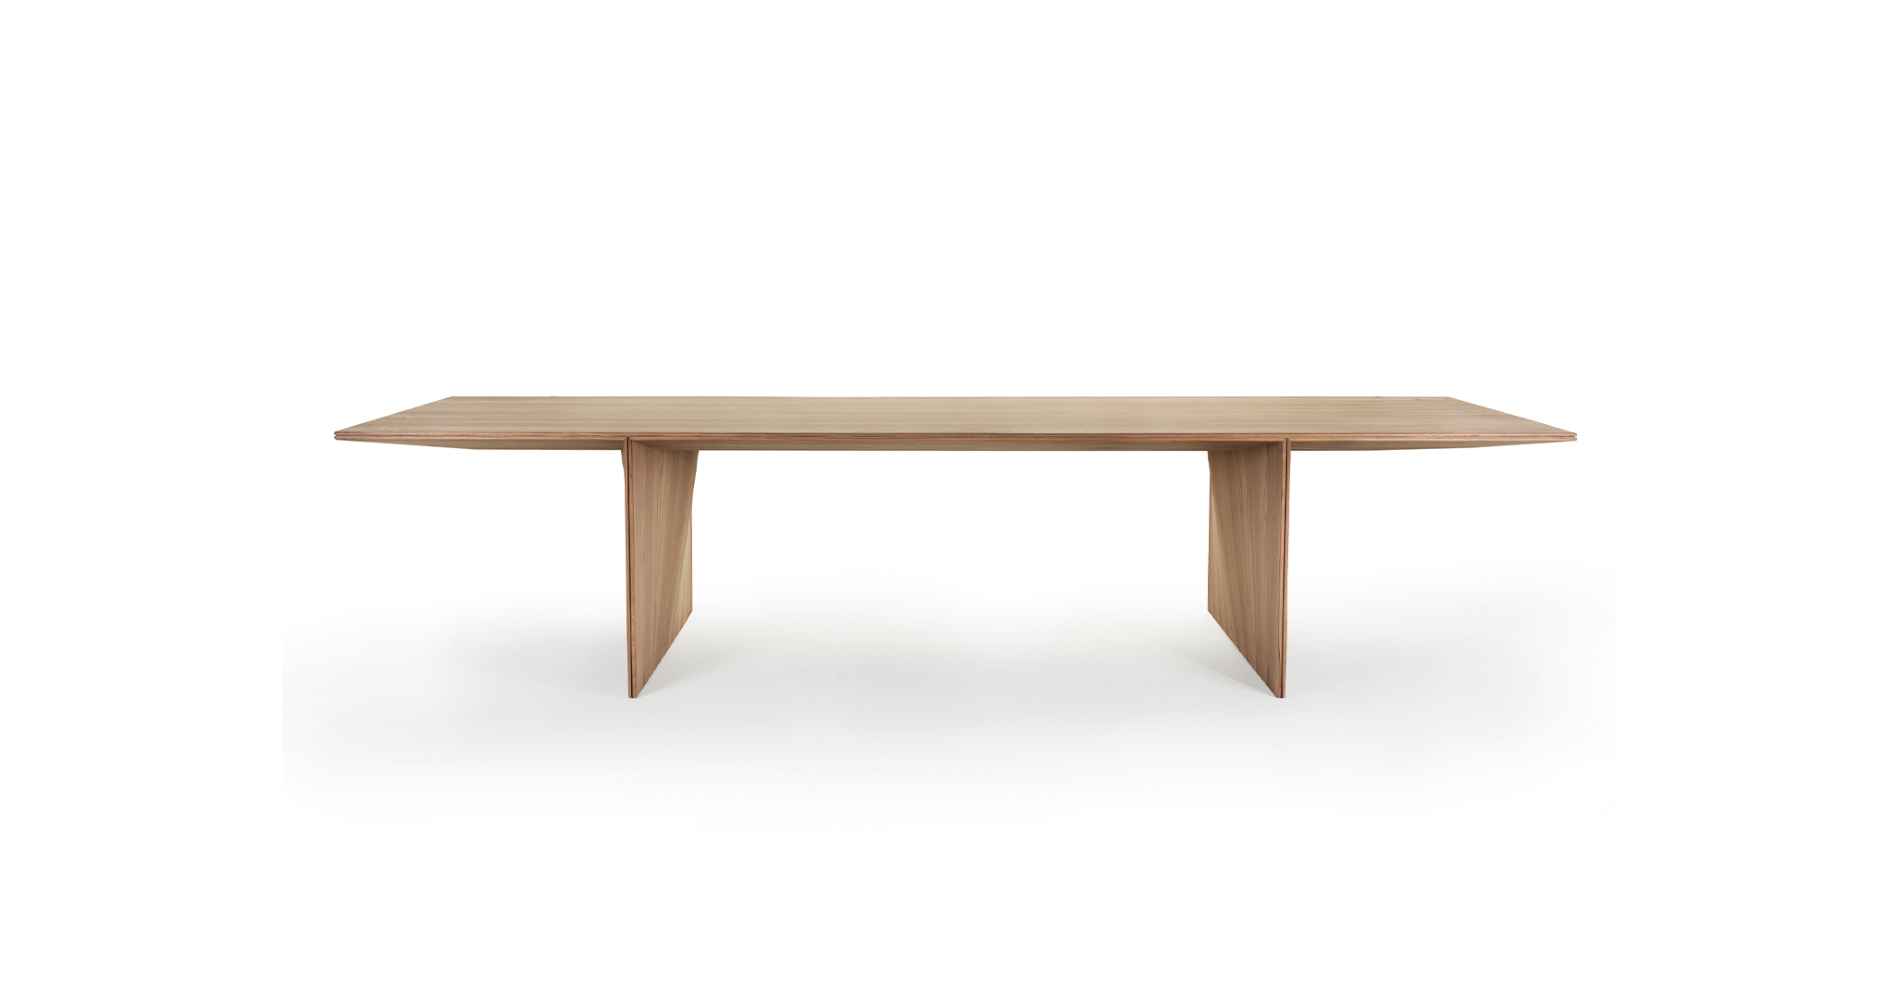 An image of Ava Table